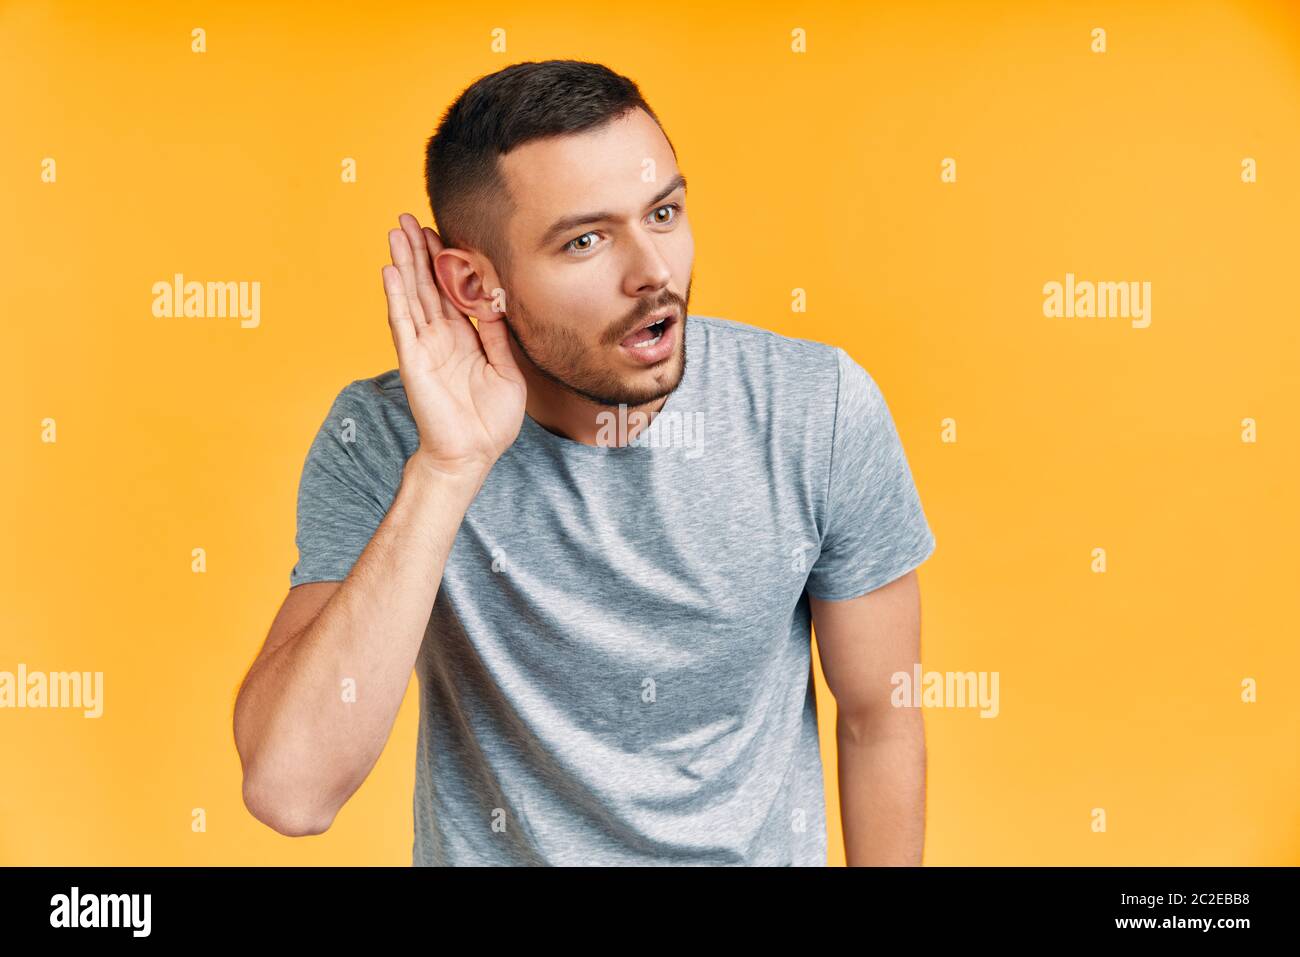 Young surprised man listening something carefully and holds his hand near ear over yellow background Stock Photo